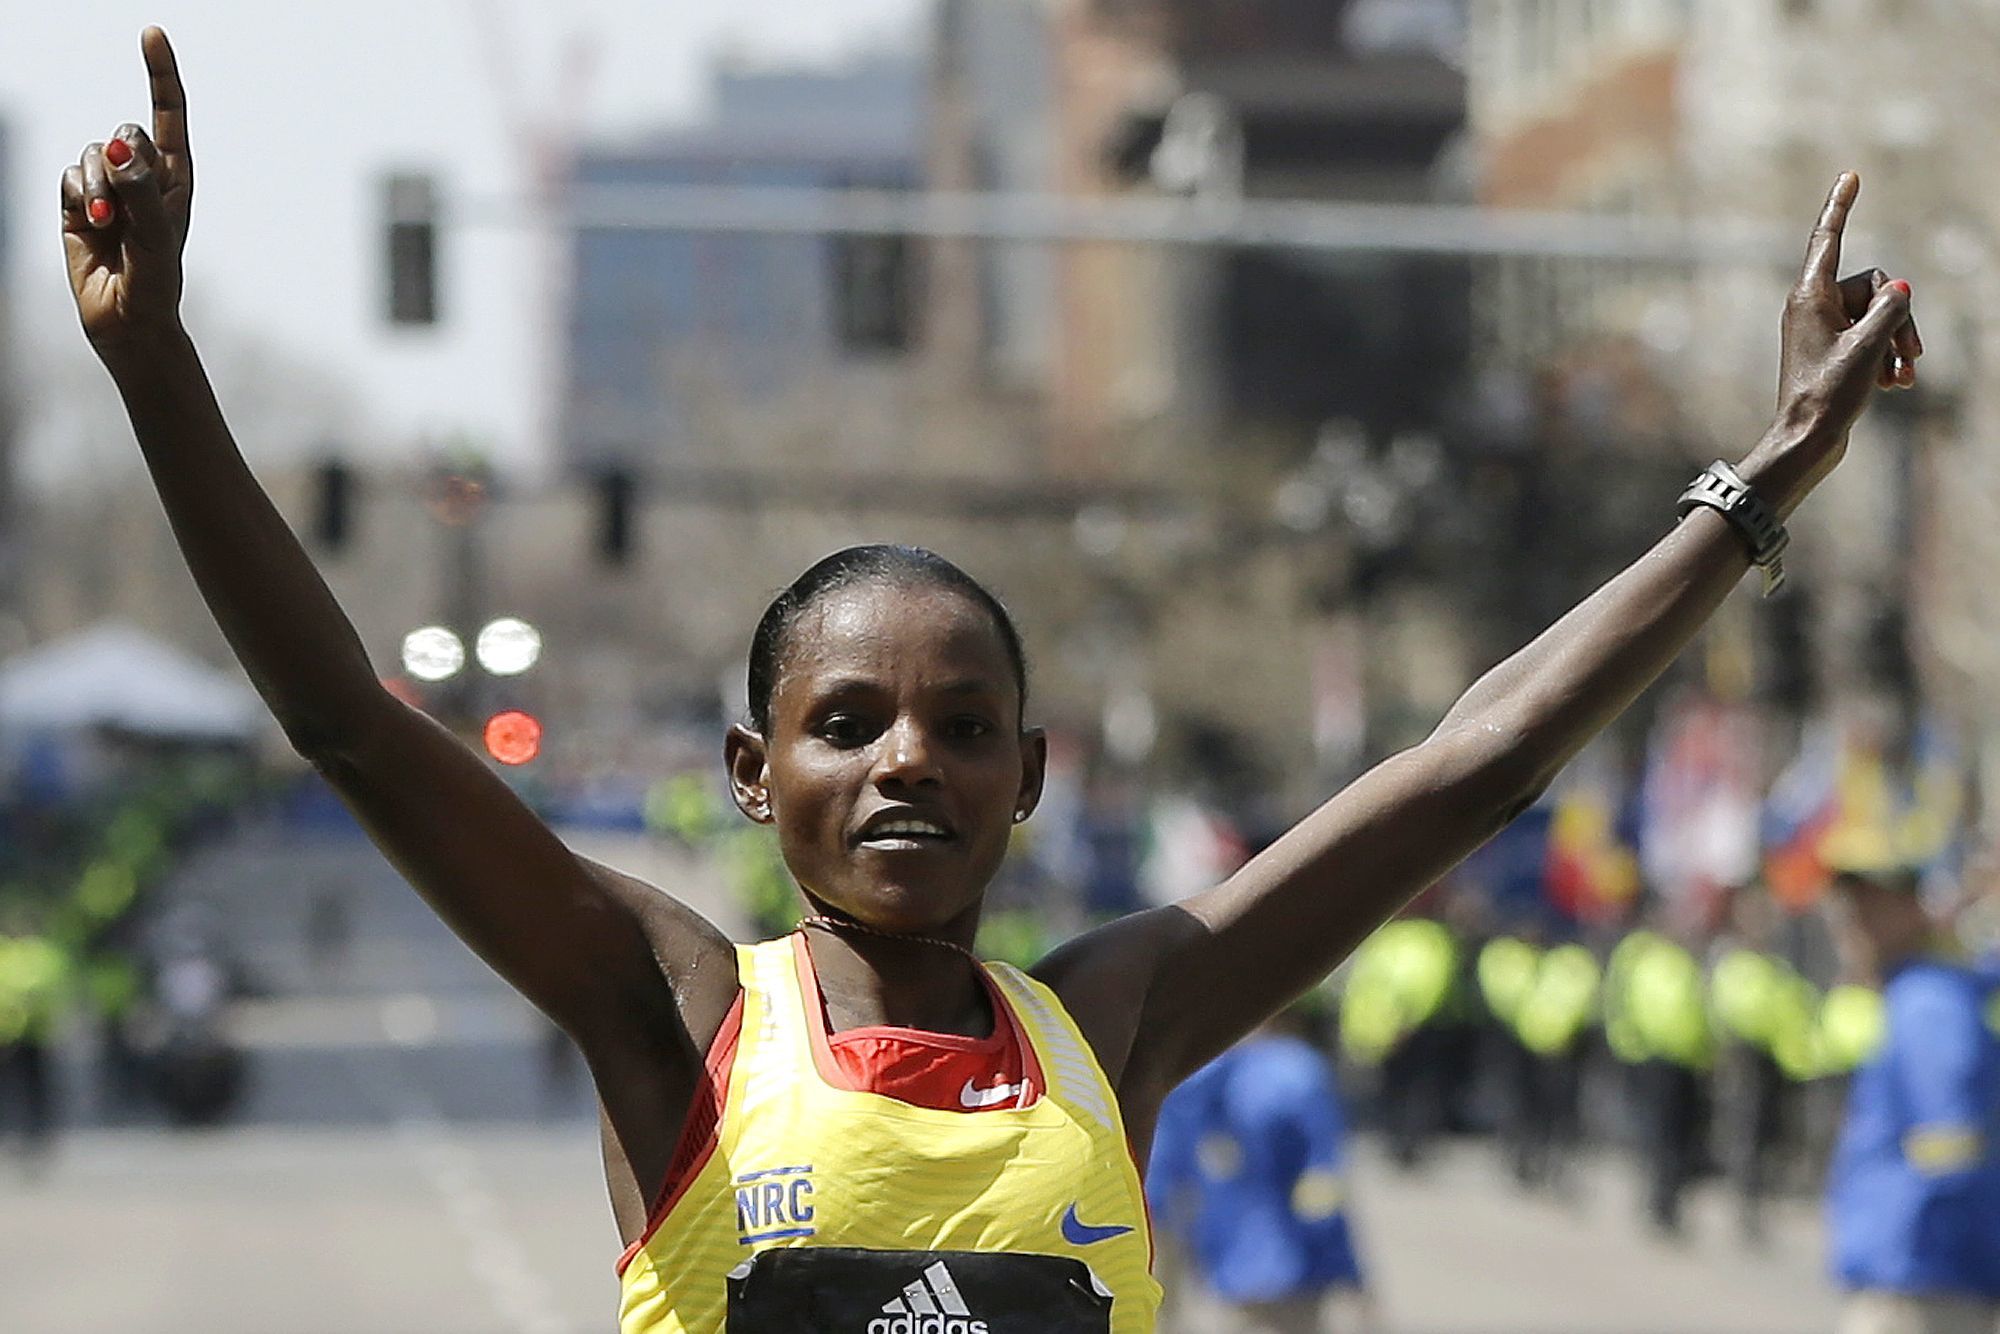 Associated Press Atsede Baysa of Ethiopia crosses the finish line to win the women’s division of the 120th Boston Marathon on Monday.